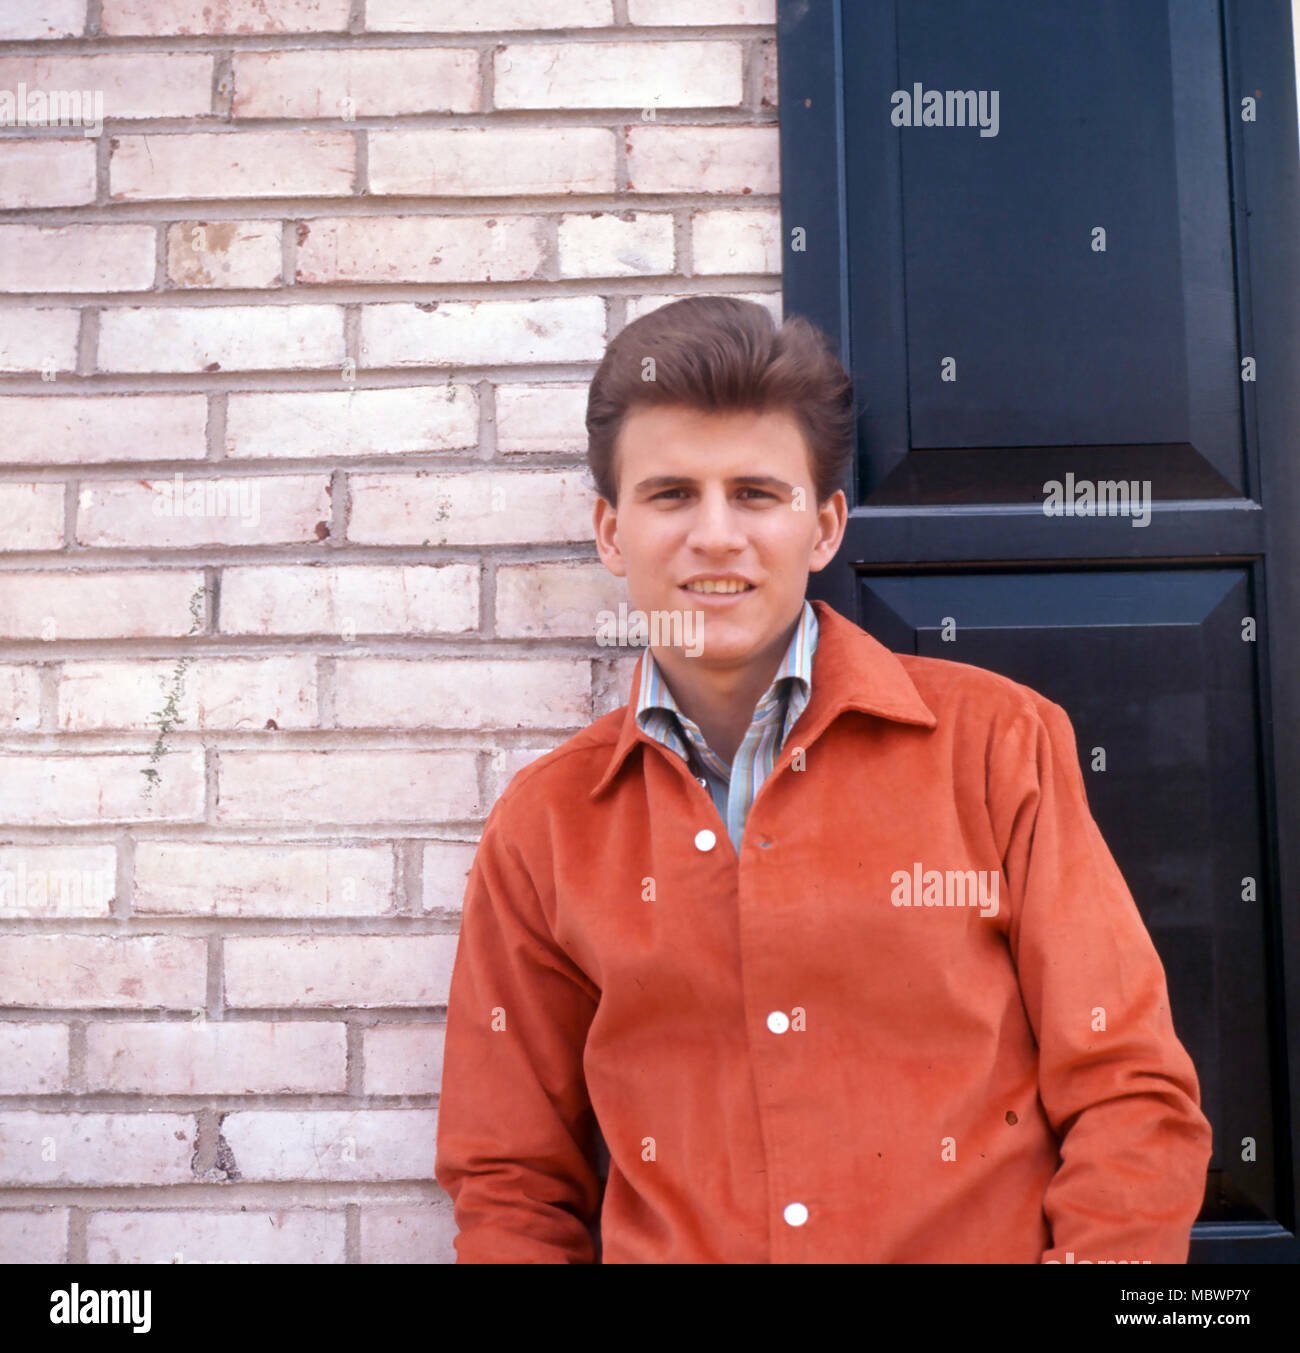 BOBBY RYDELL American pop singer about 1962 Stock Photo